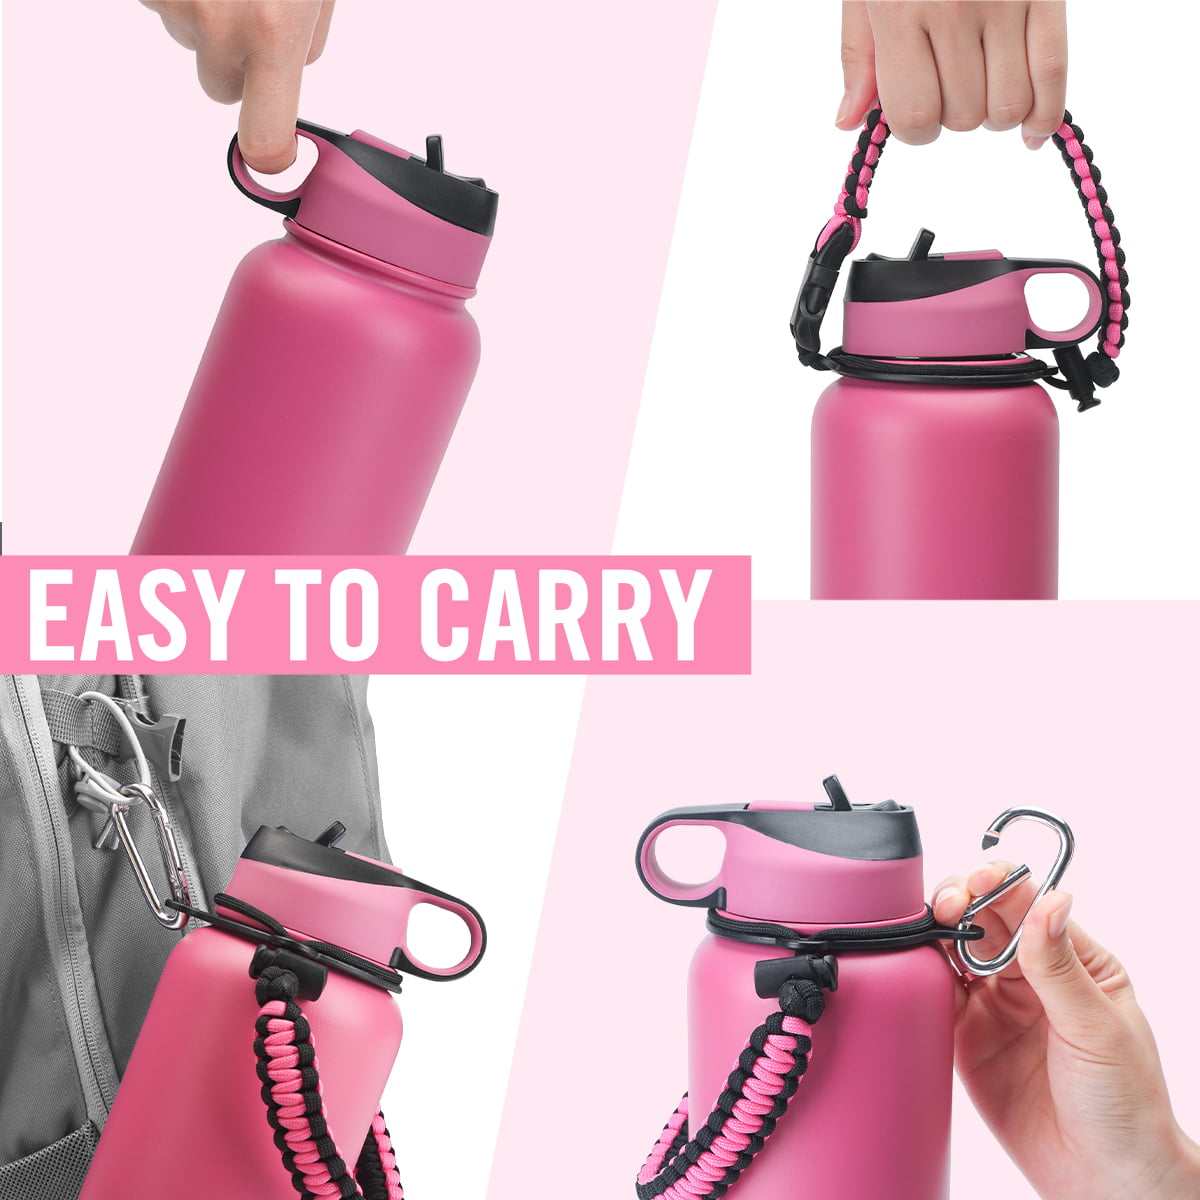 Life's Easy - Straw Lid Bottle w/ Paracord Carabiner Handle Carrier, Silicone Sleeve, 40 oz. Insulated Flask for Hot and Cold Drinks (40oz, Pink)